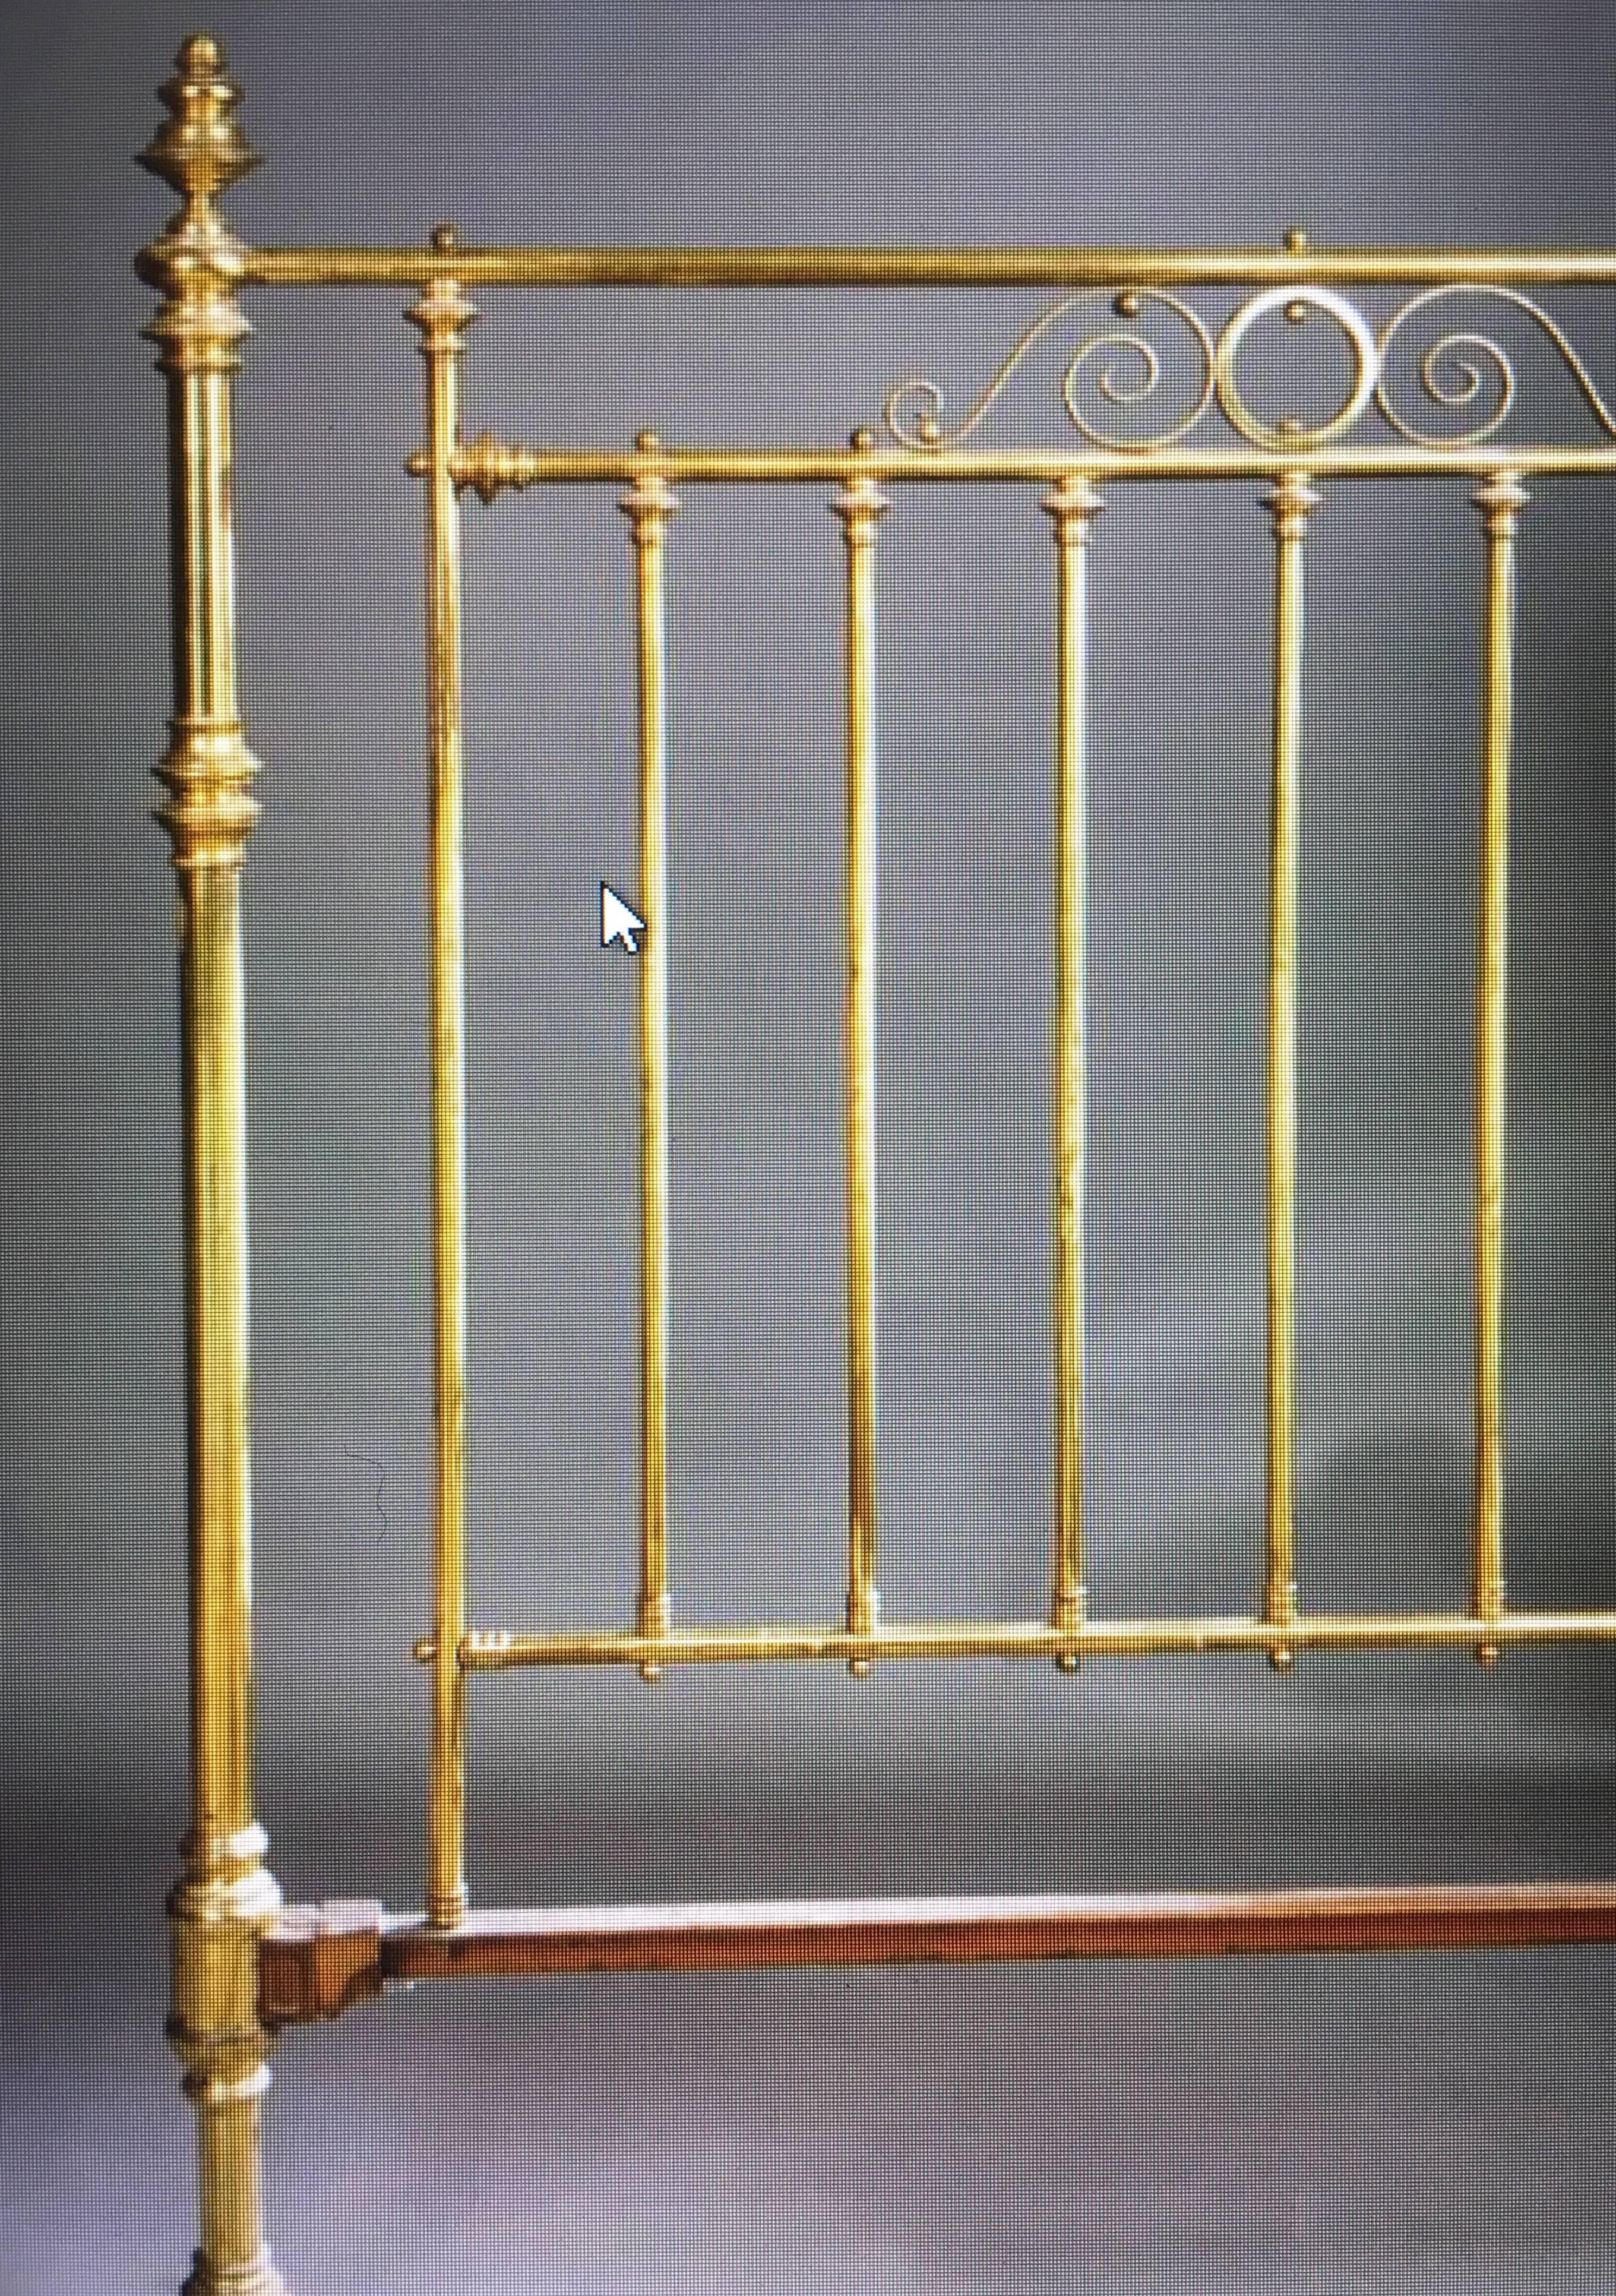 A magnificent all brass bedstead with decorative castings, ornate kneecaps, side drops and knobs with wheels.

The price is for the bed alone. The base and mattress are not included.
Back side measures in cm. H 153, W 140
Front side measures in